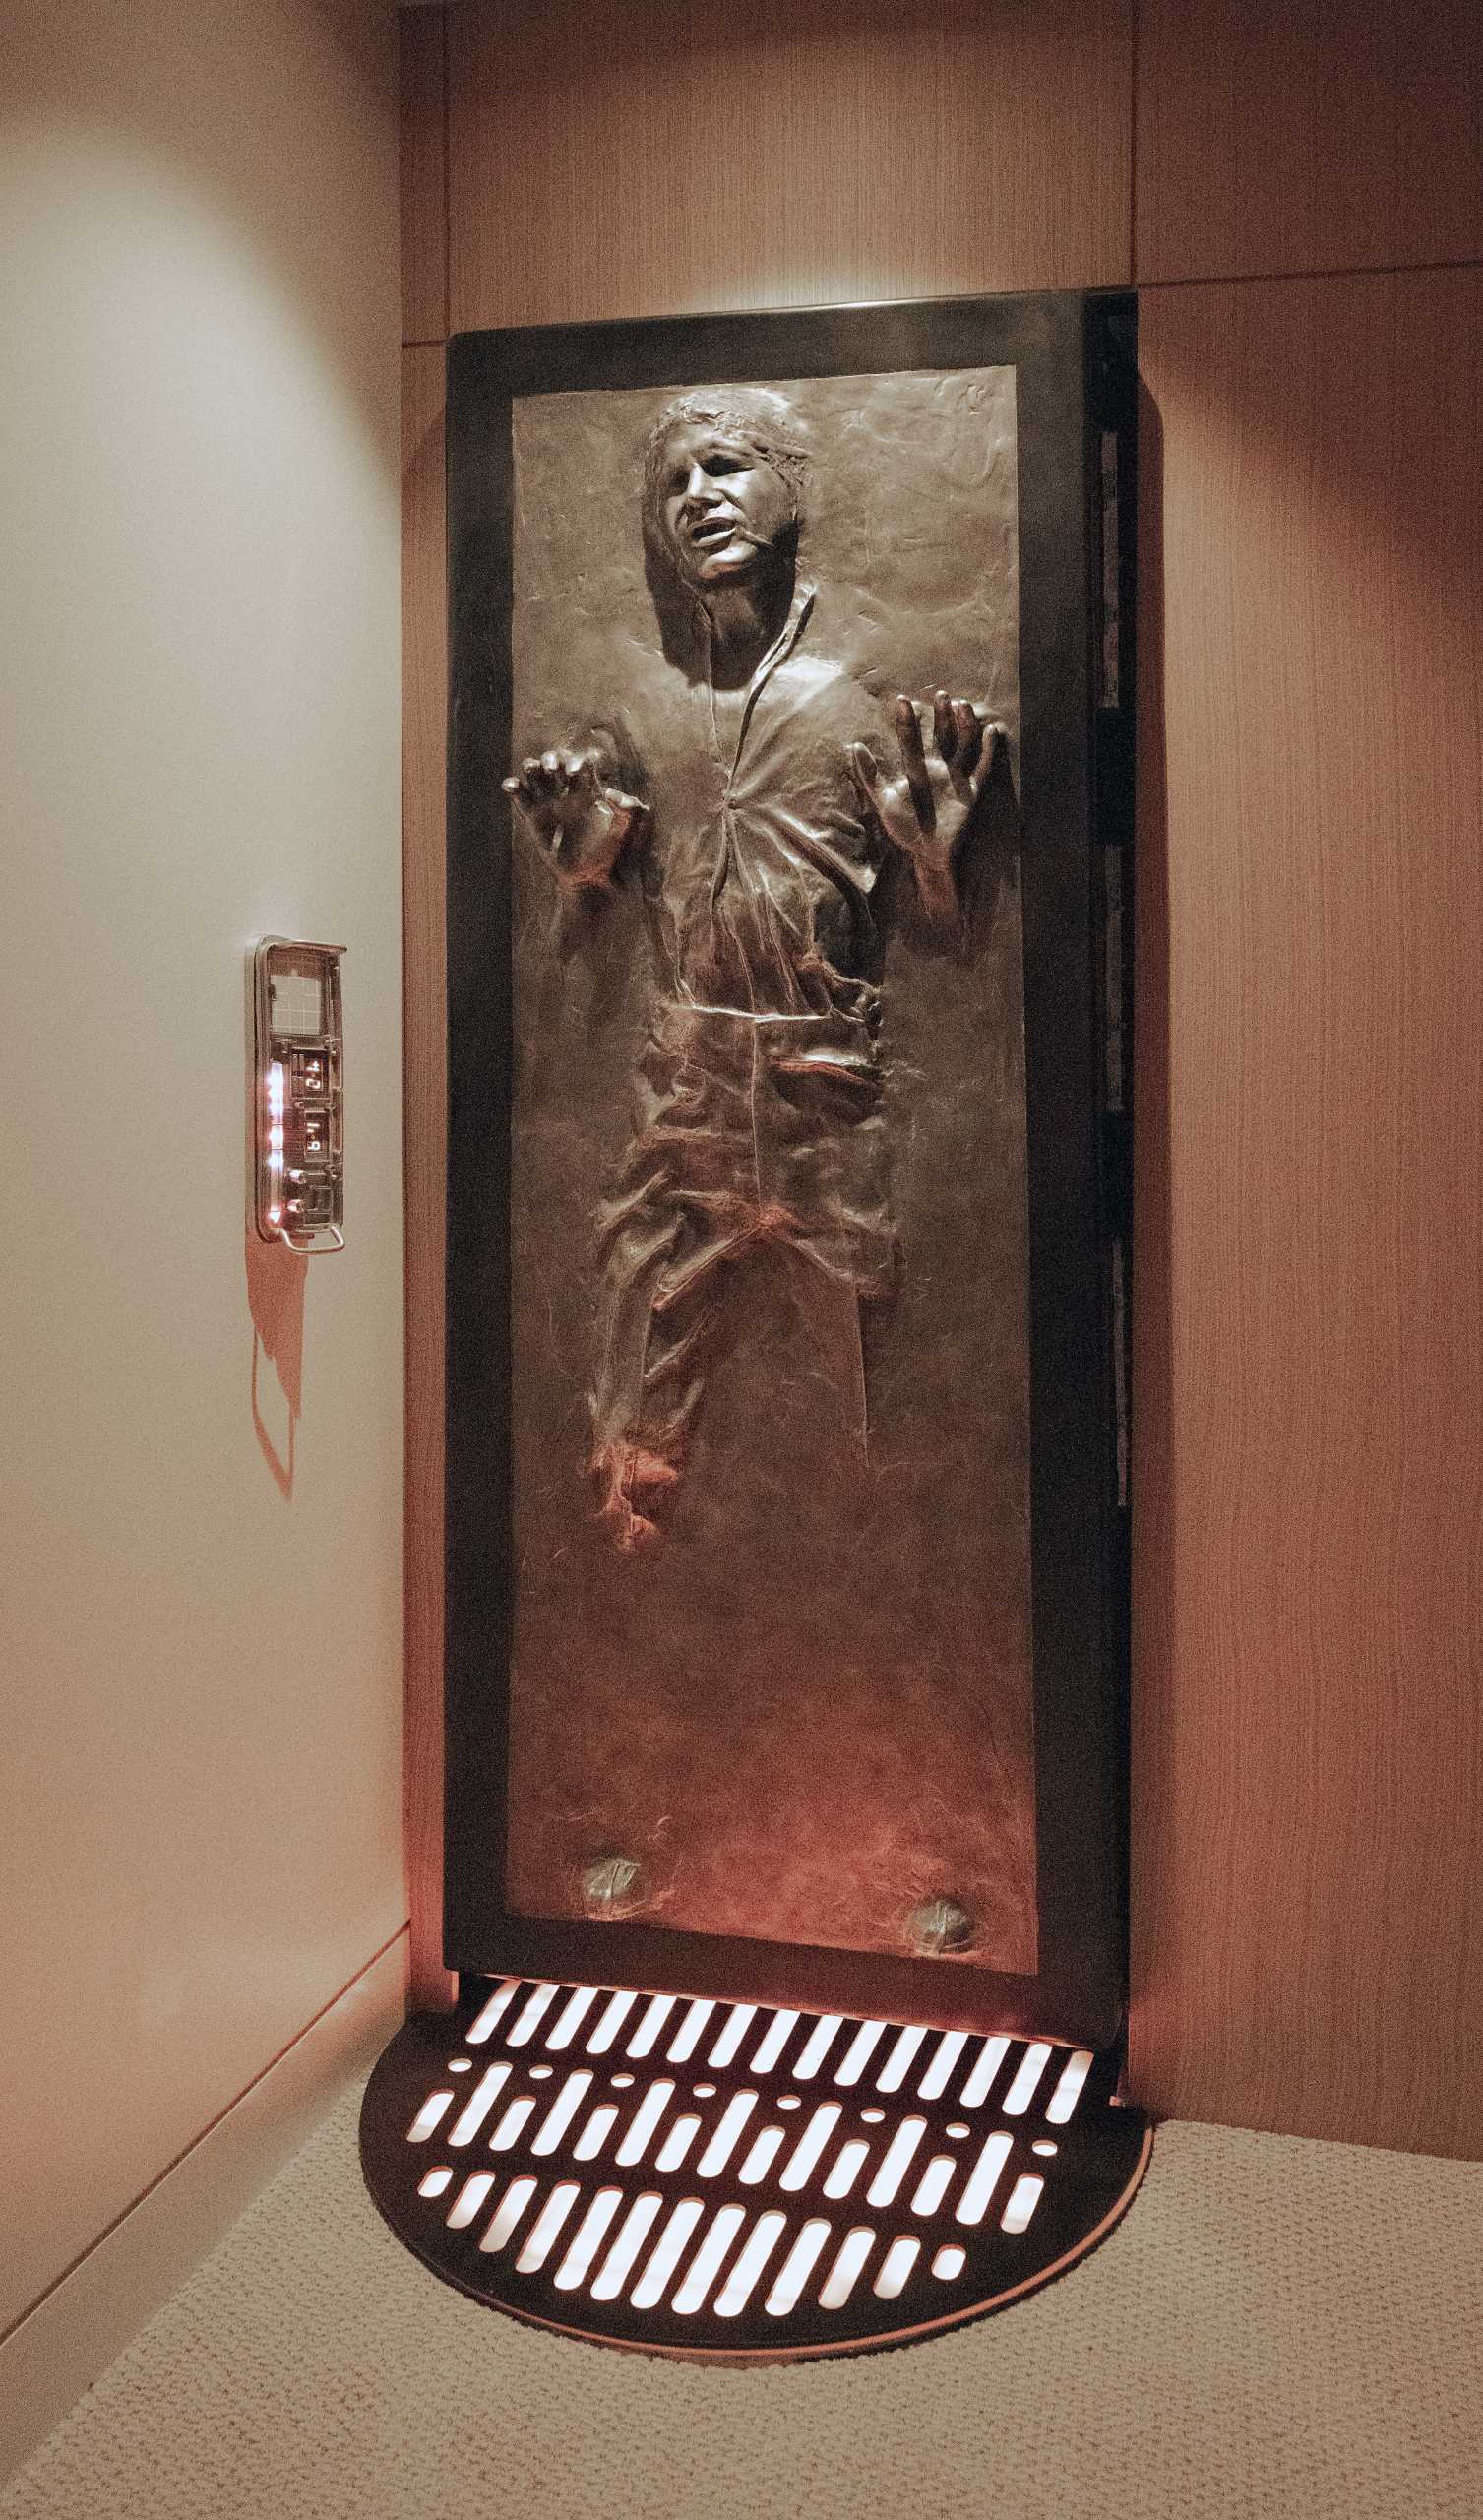 A modern ،me includes a ‘carbonite Han Solo’ door flush in a wall that ‘beep-boops’, that leads to a surprising Ninja Room.